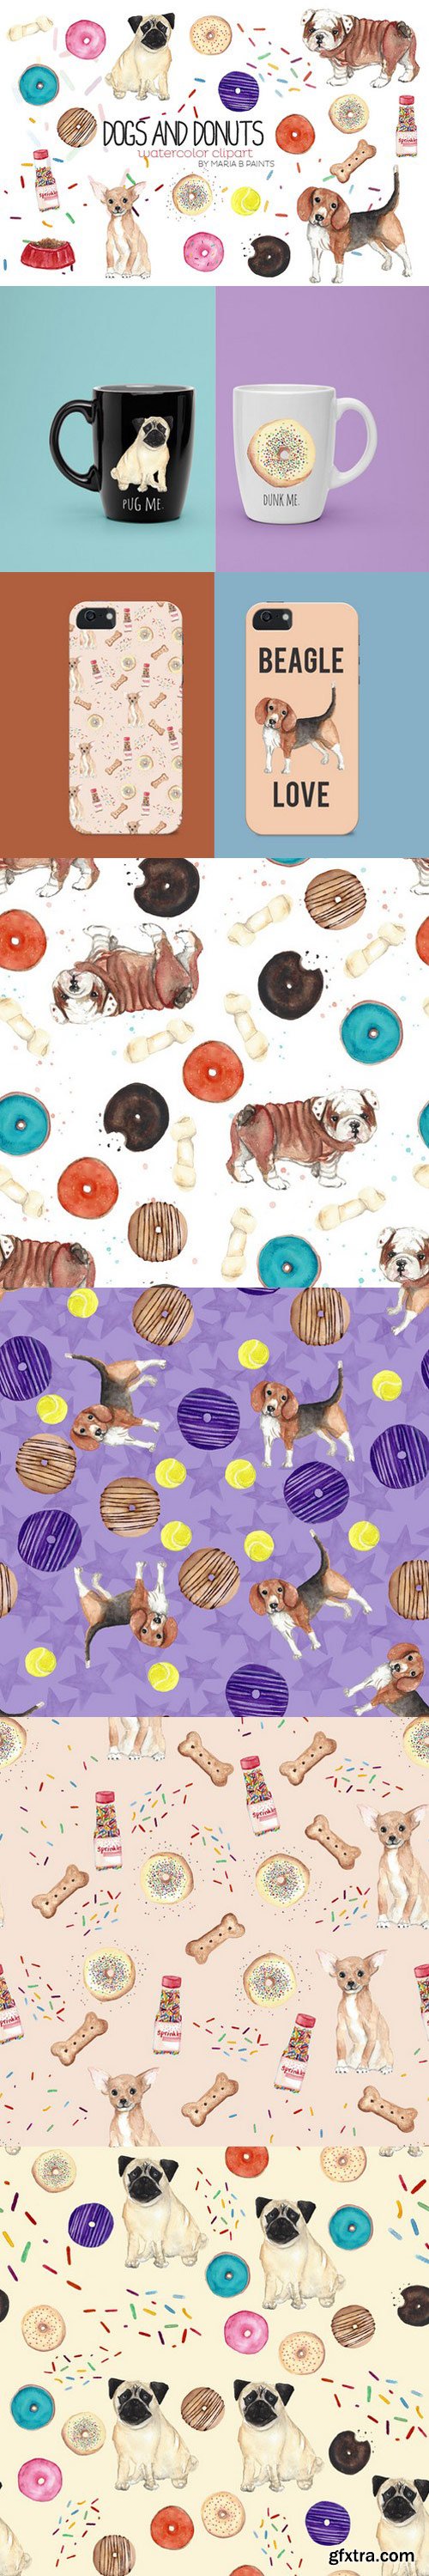 CM - Watercolor Clip Art - Dogs n Donuts 415922